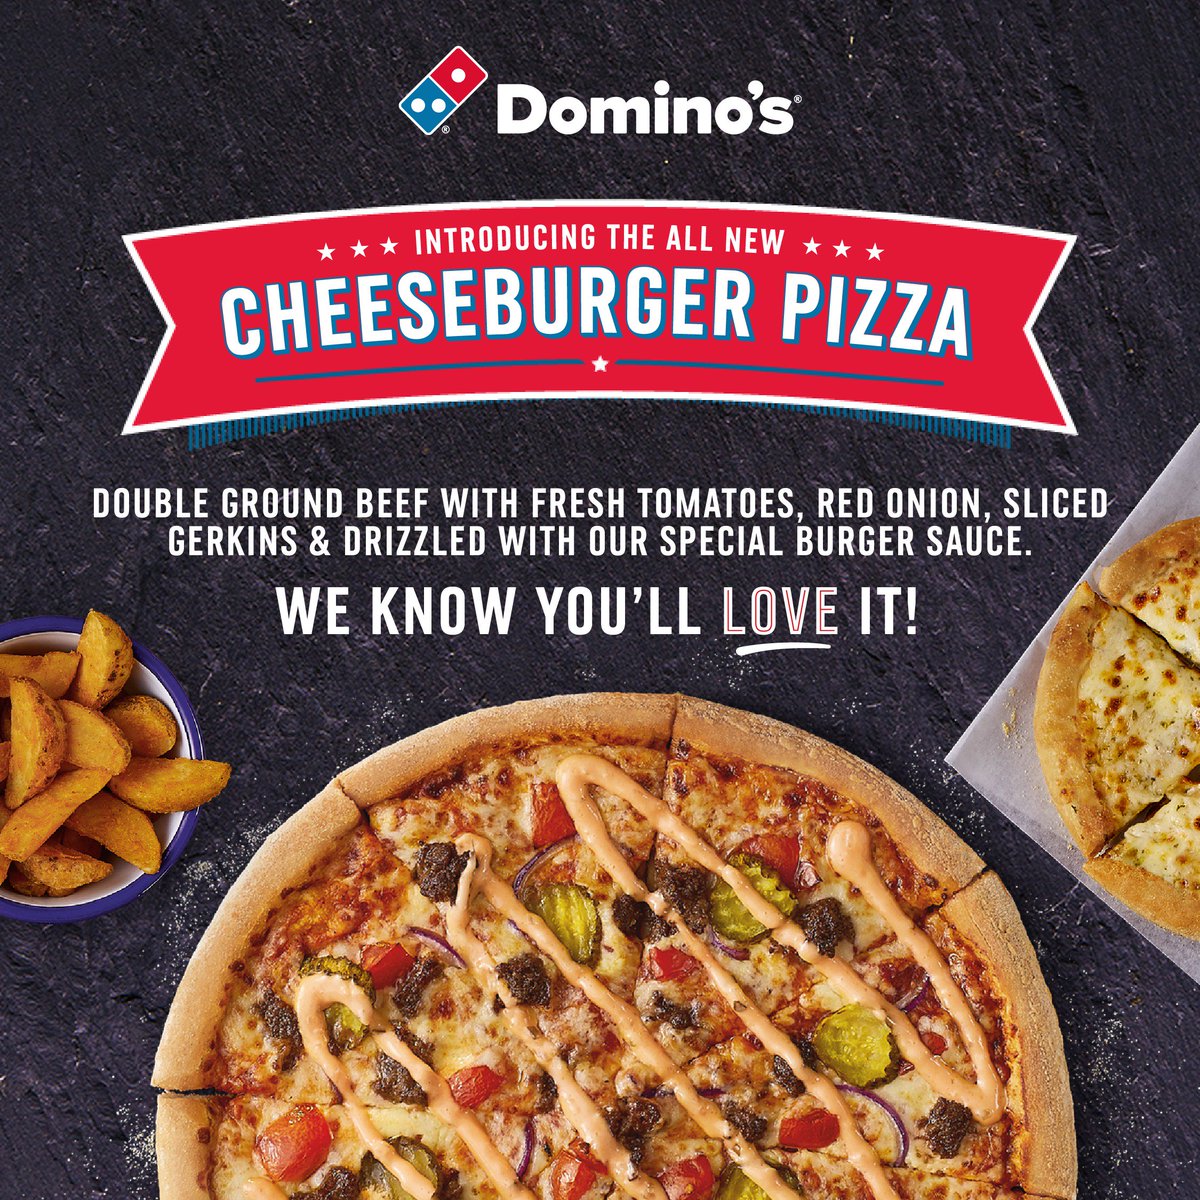 It's a miserable, rainy night...cheer it up with a cheeseburger pizza (or two) from @Dominos_UK! Students get BOGOF with code PIZZA241 every day 🍕🍔 #AD